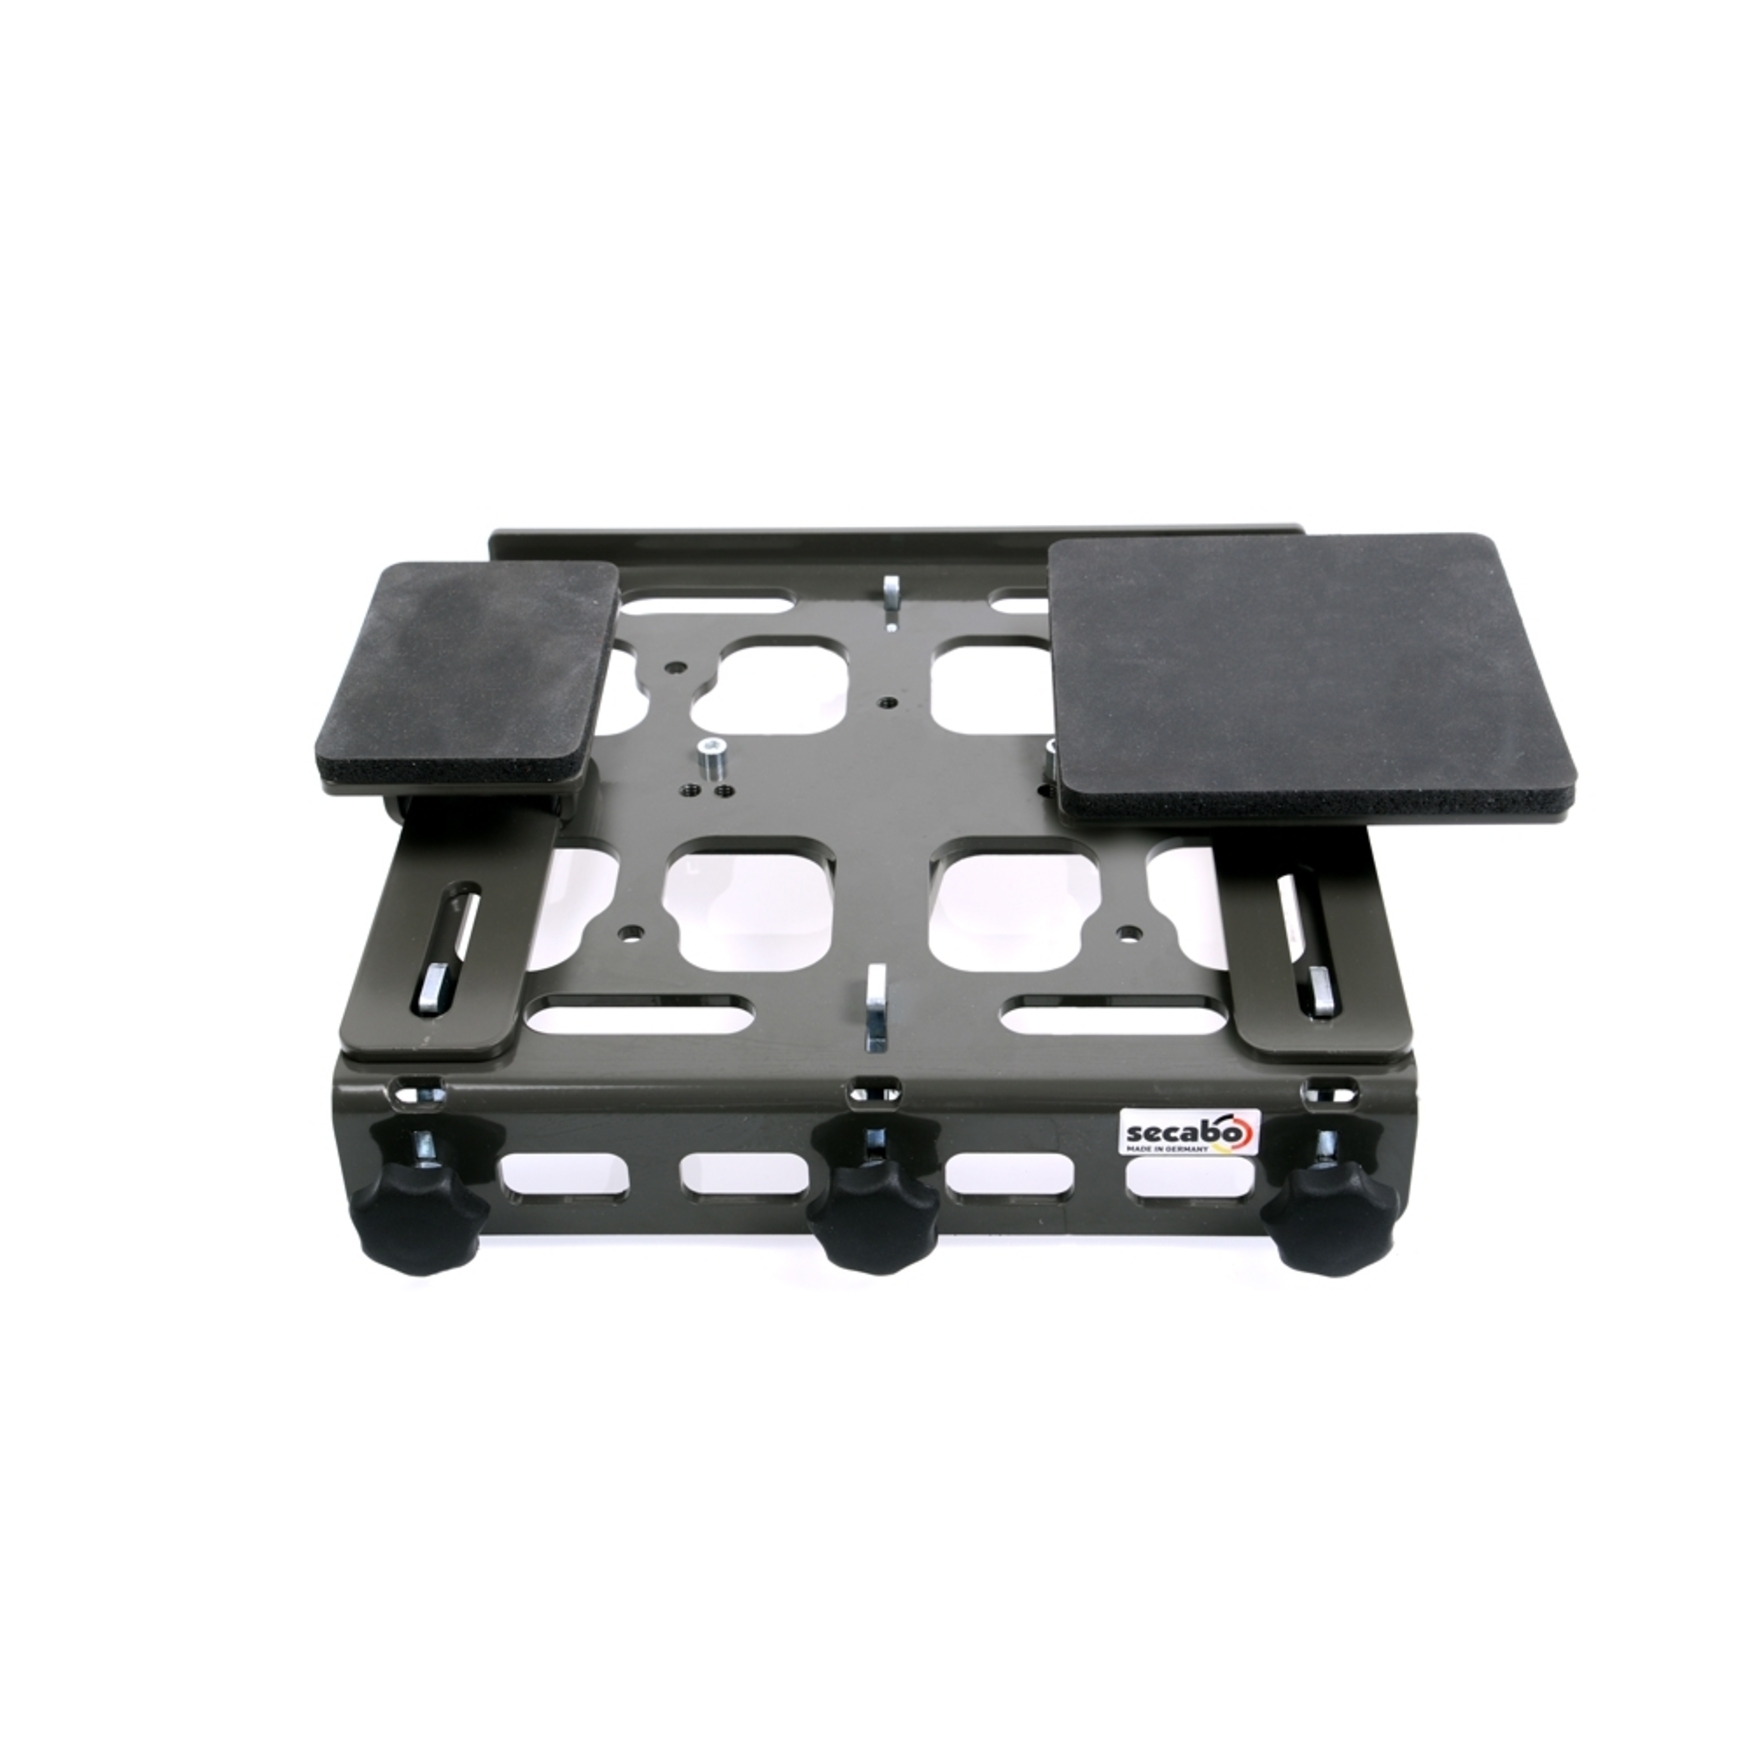 Secabo quick change system for exchangeable base plates